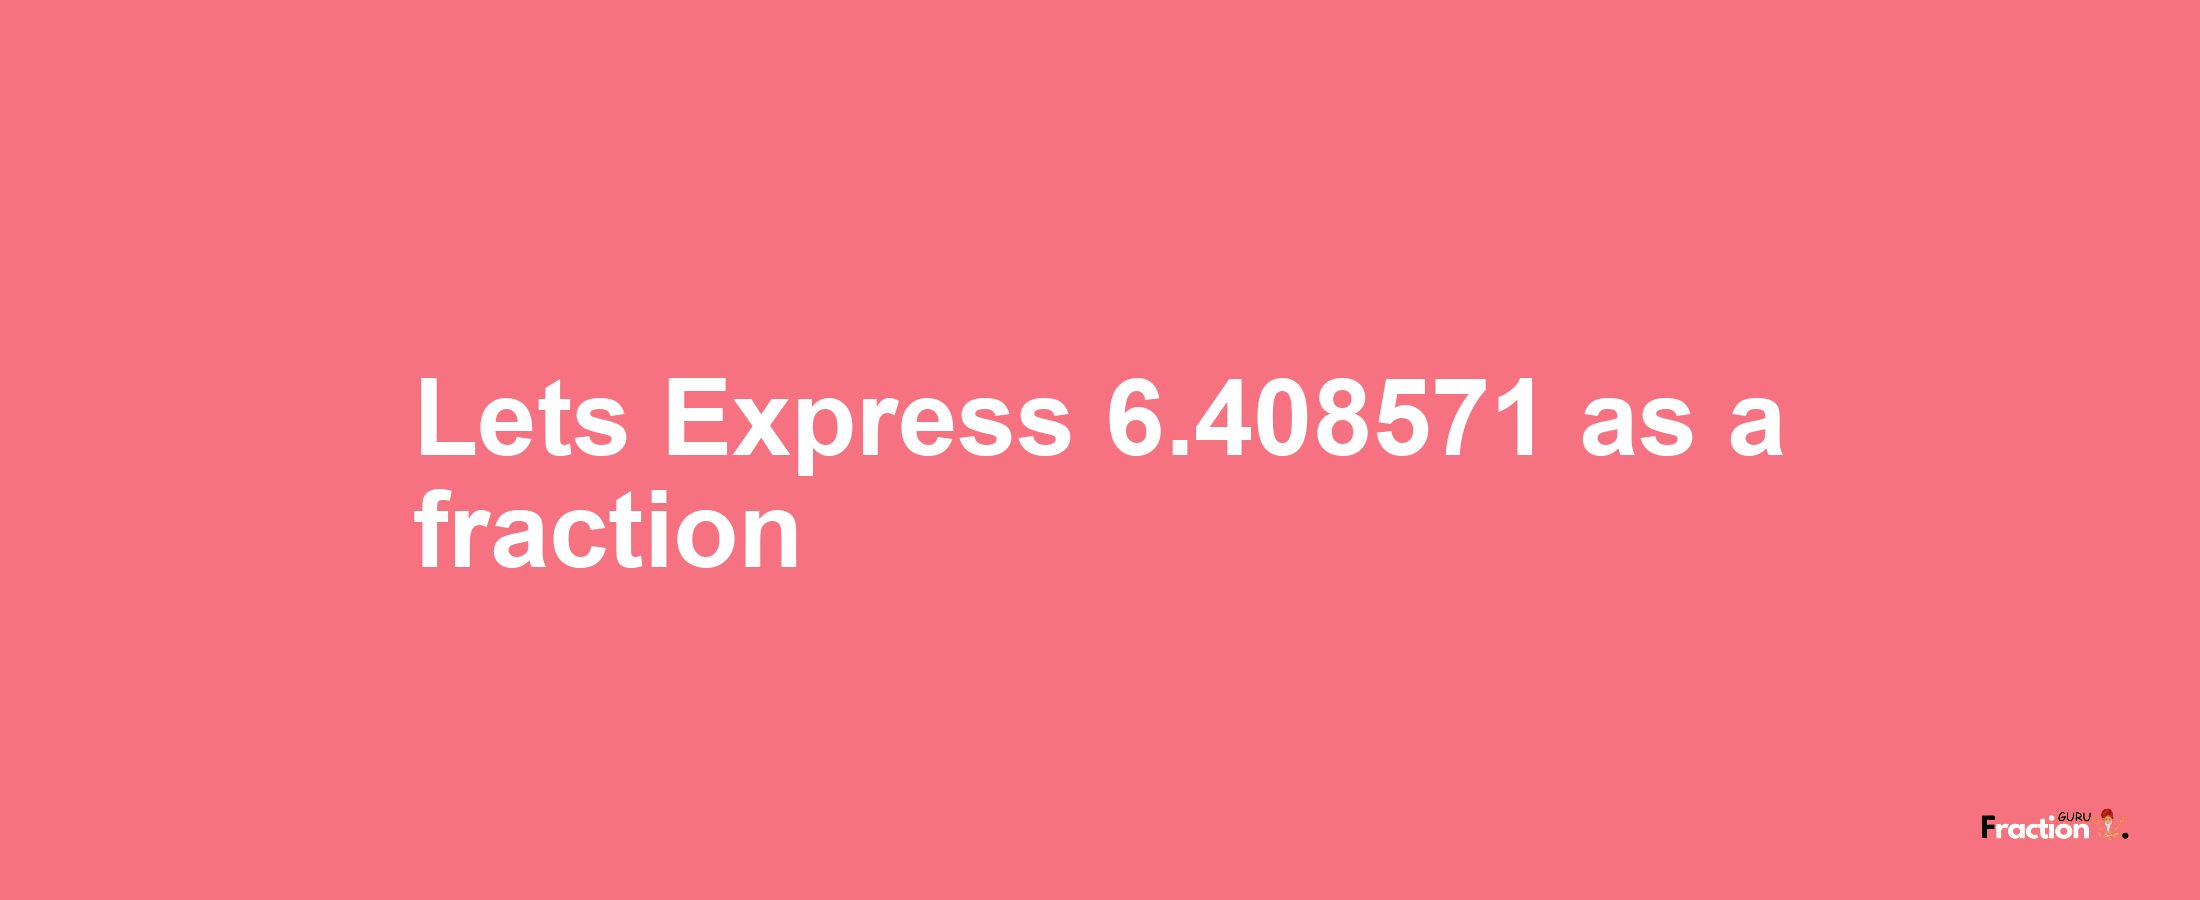 Lets Express 6.408571 as afraction